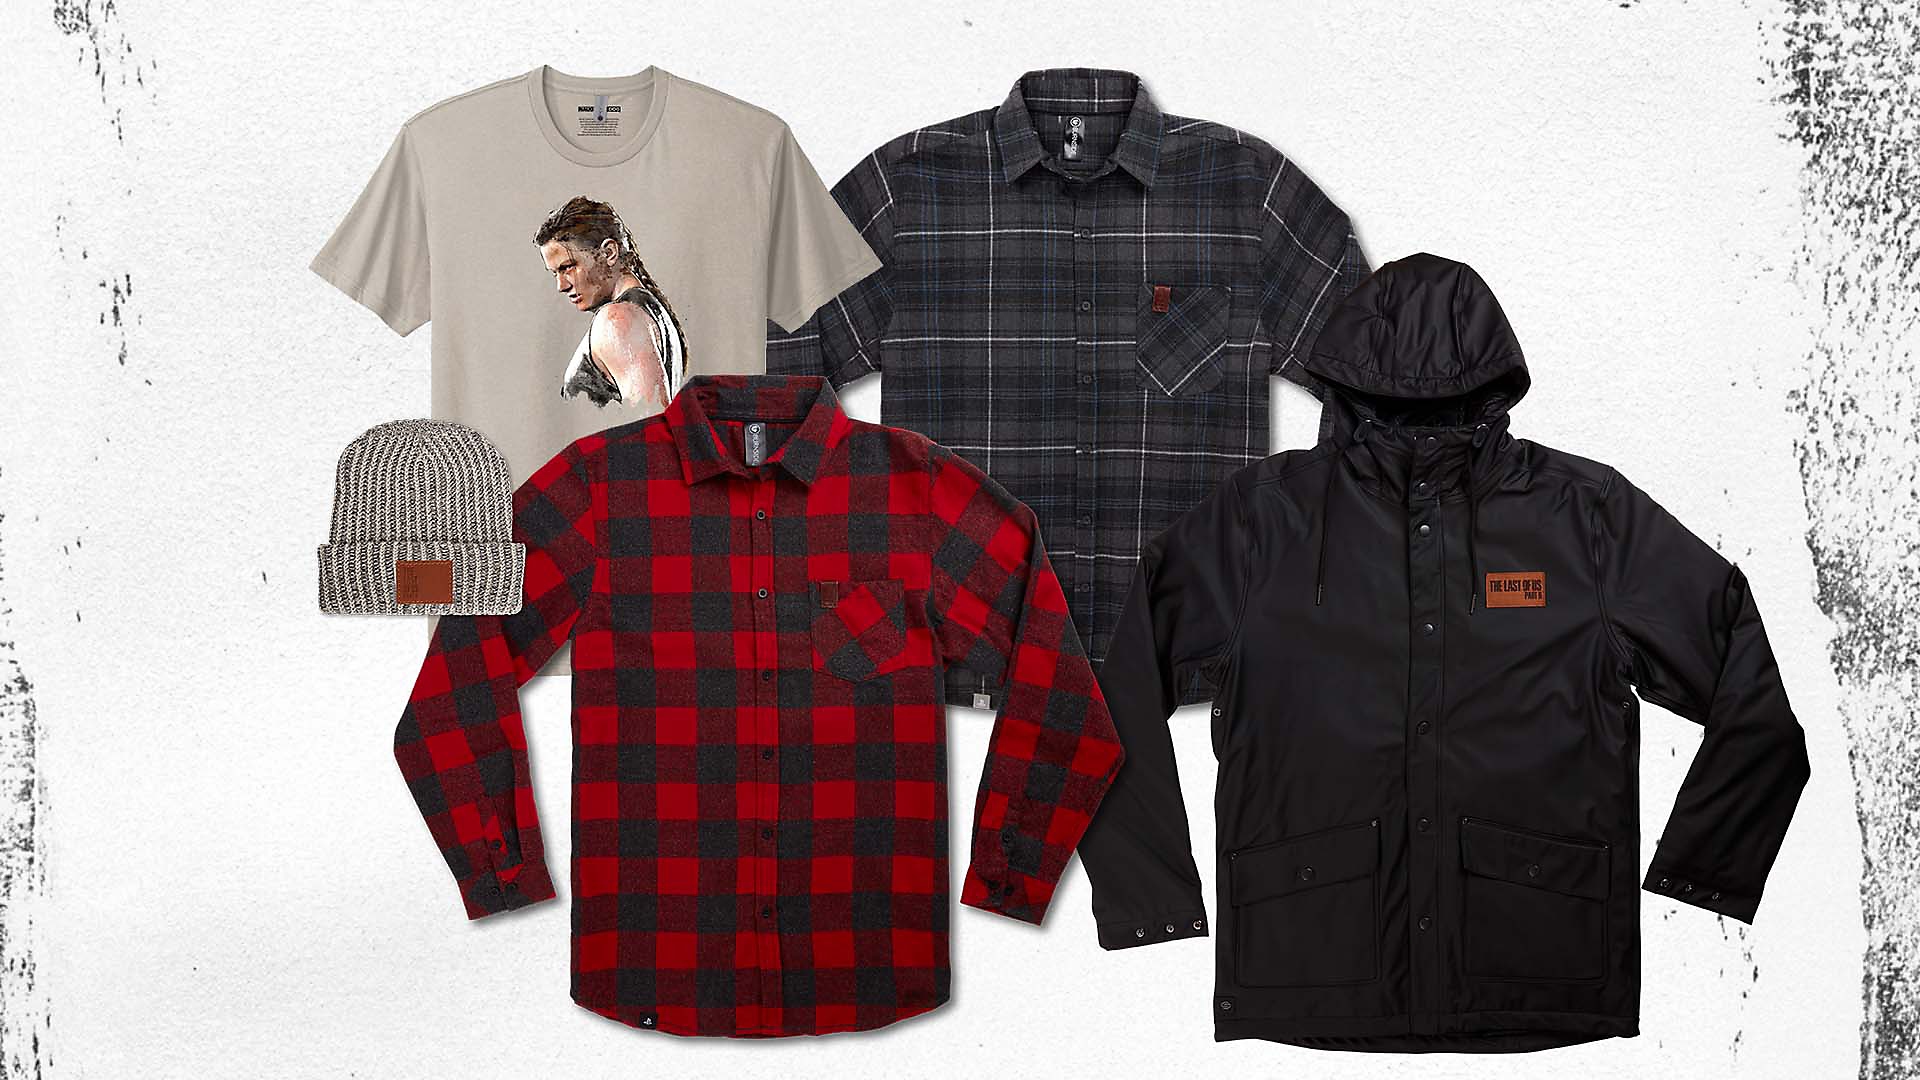 THE LAST OF US PART II MERCH FROM PLAYSTATION GEAR STORE